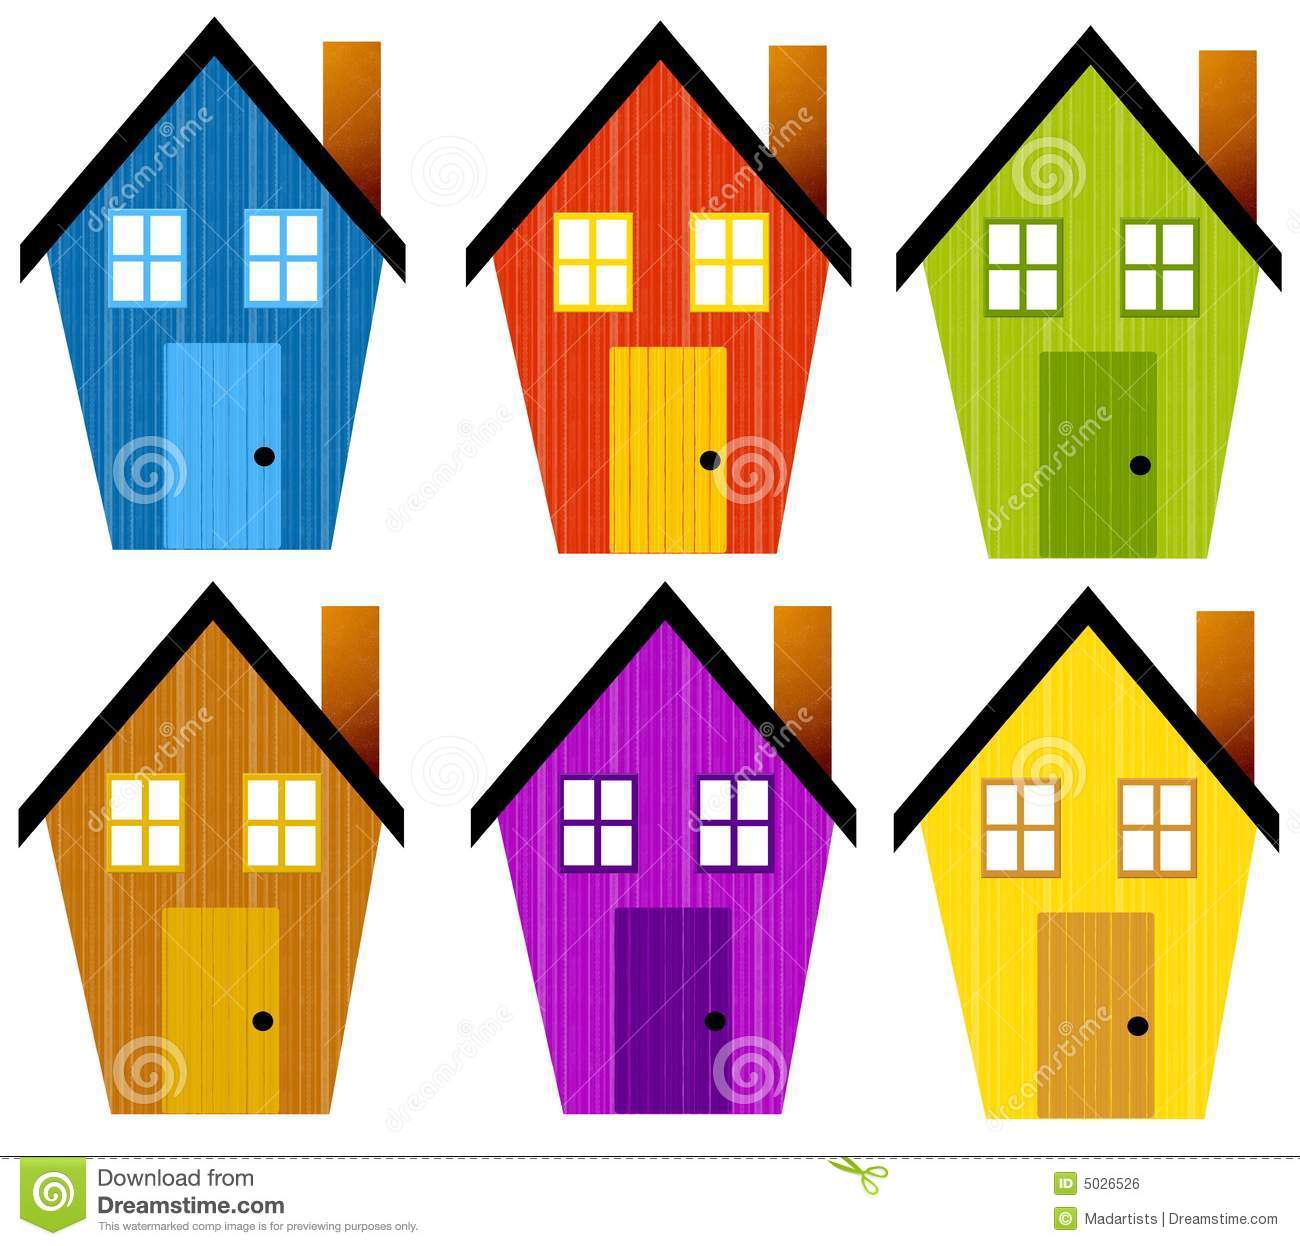 Artsy Rustic Clip Art Houses Royalty Free Stock Image   Image  5026526